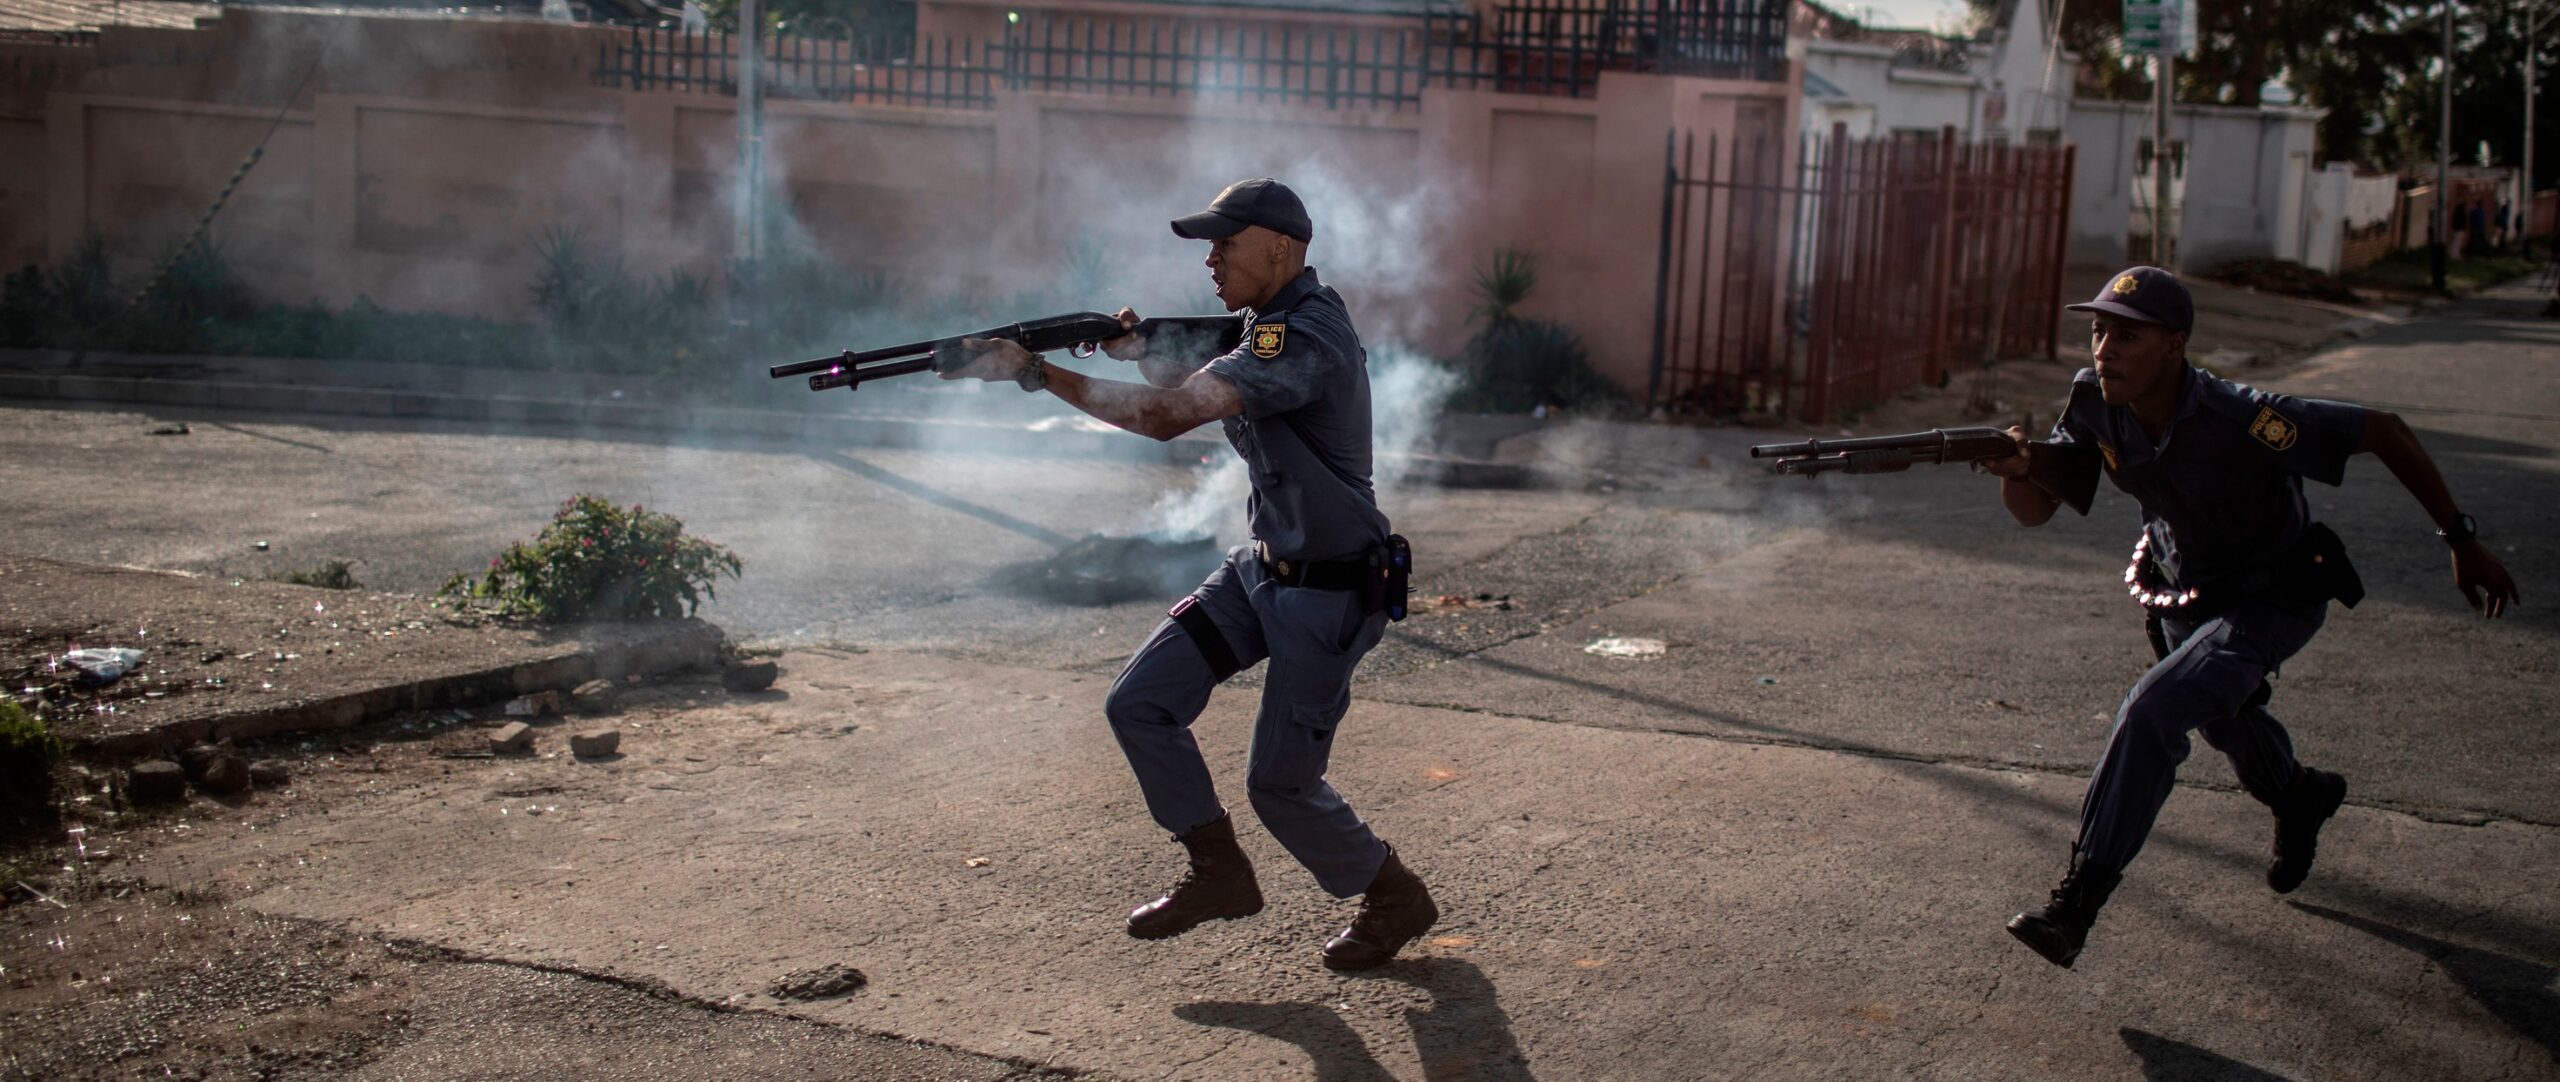 Global: Dozens killed and thousands maimed by police misuse of rubber bullets